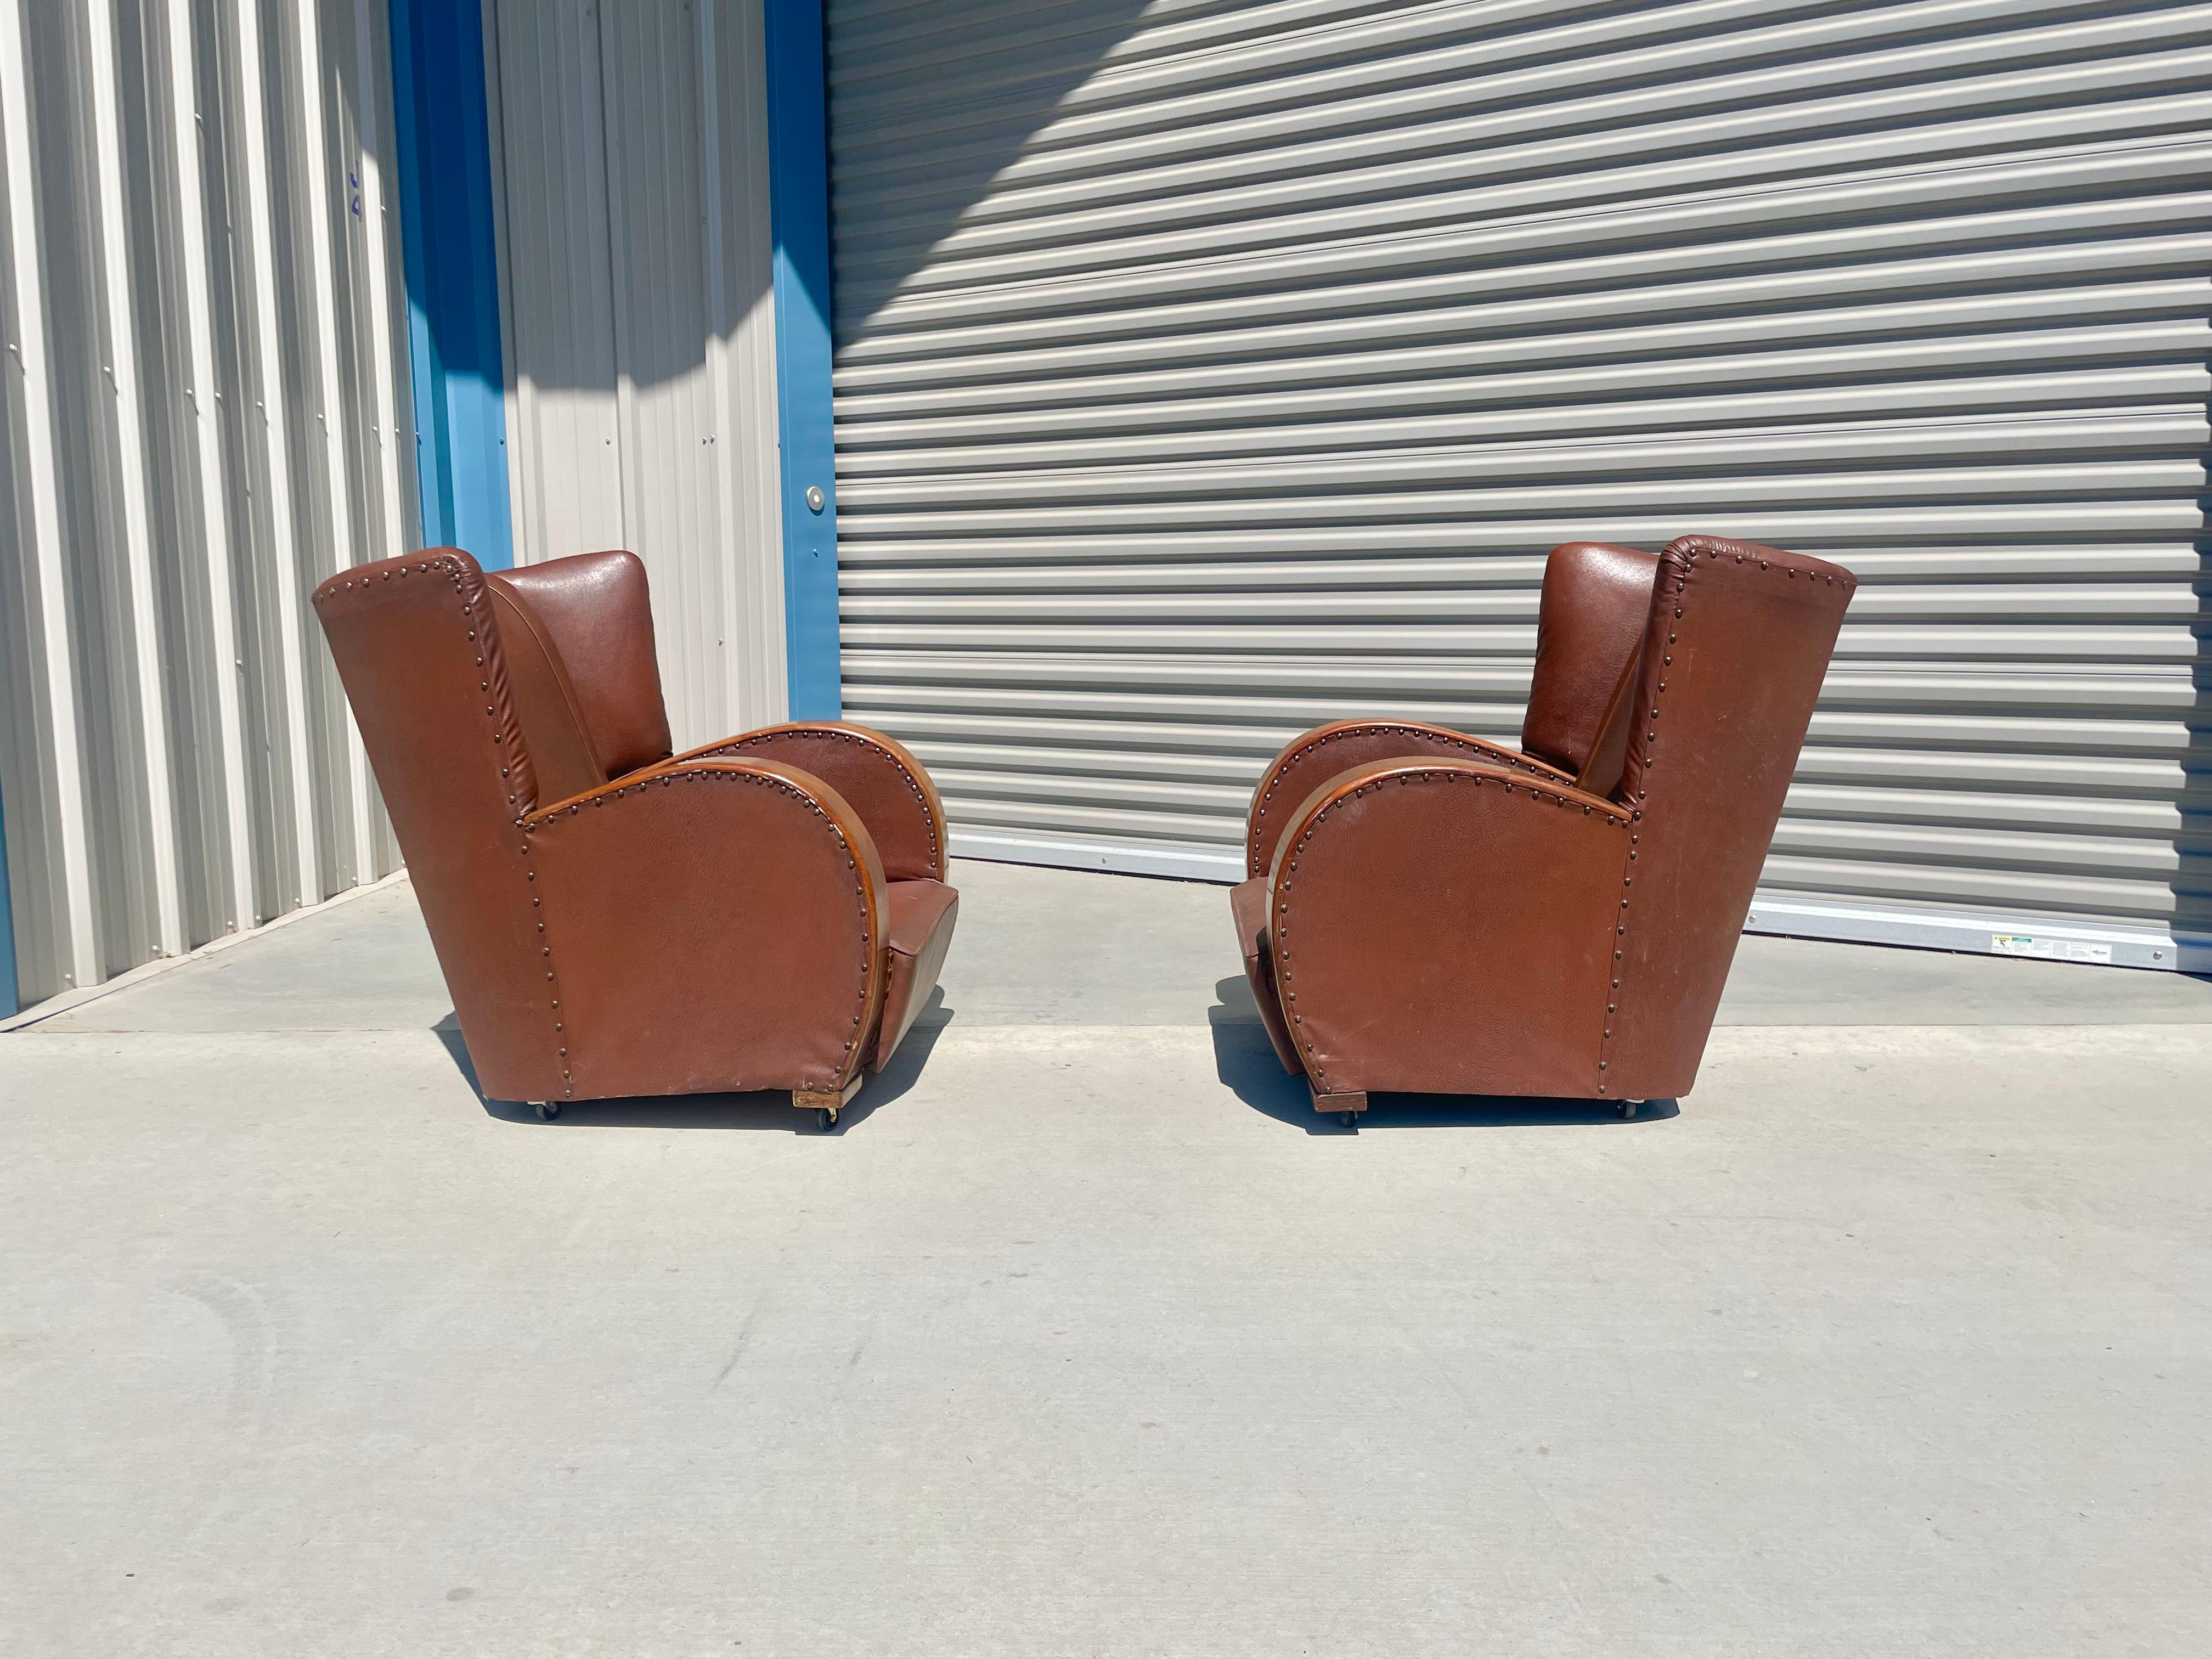 American Vintage Art Deco Leather Lounge Chairs For Sale